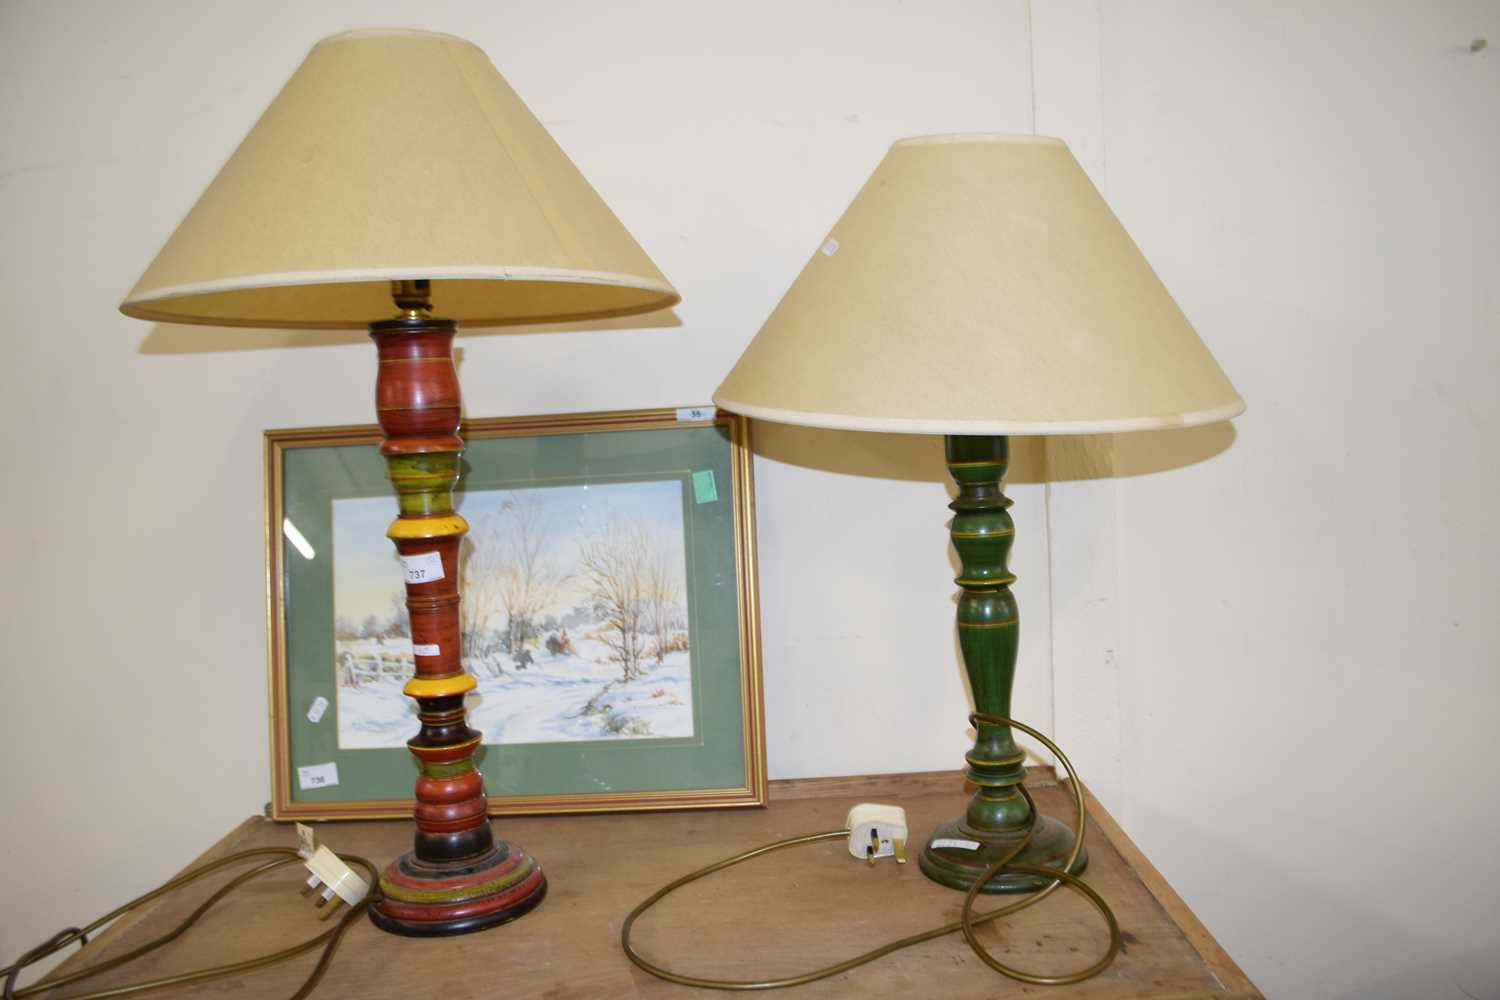 PAIR OF MODERN TABLE LAMPS WITH PAINTED BASES